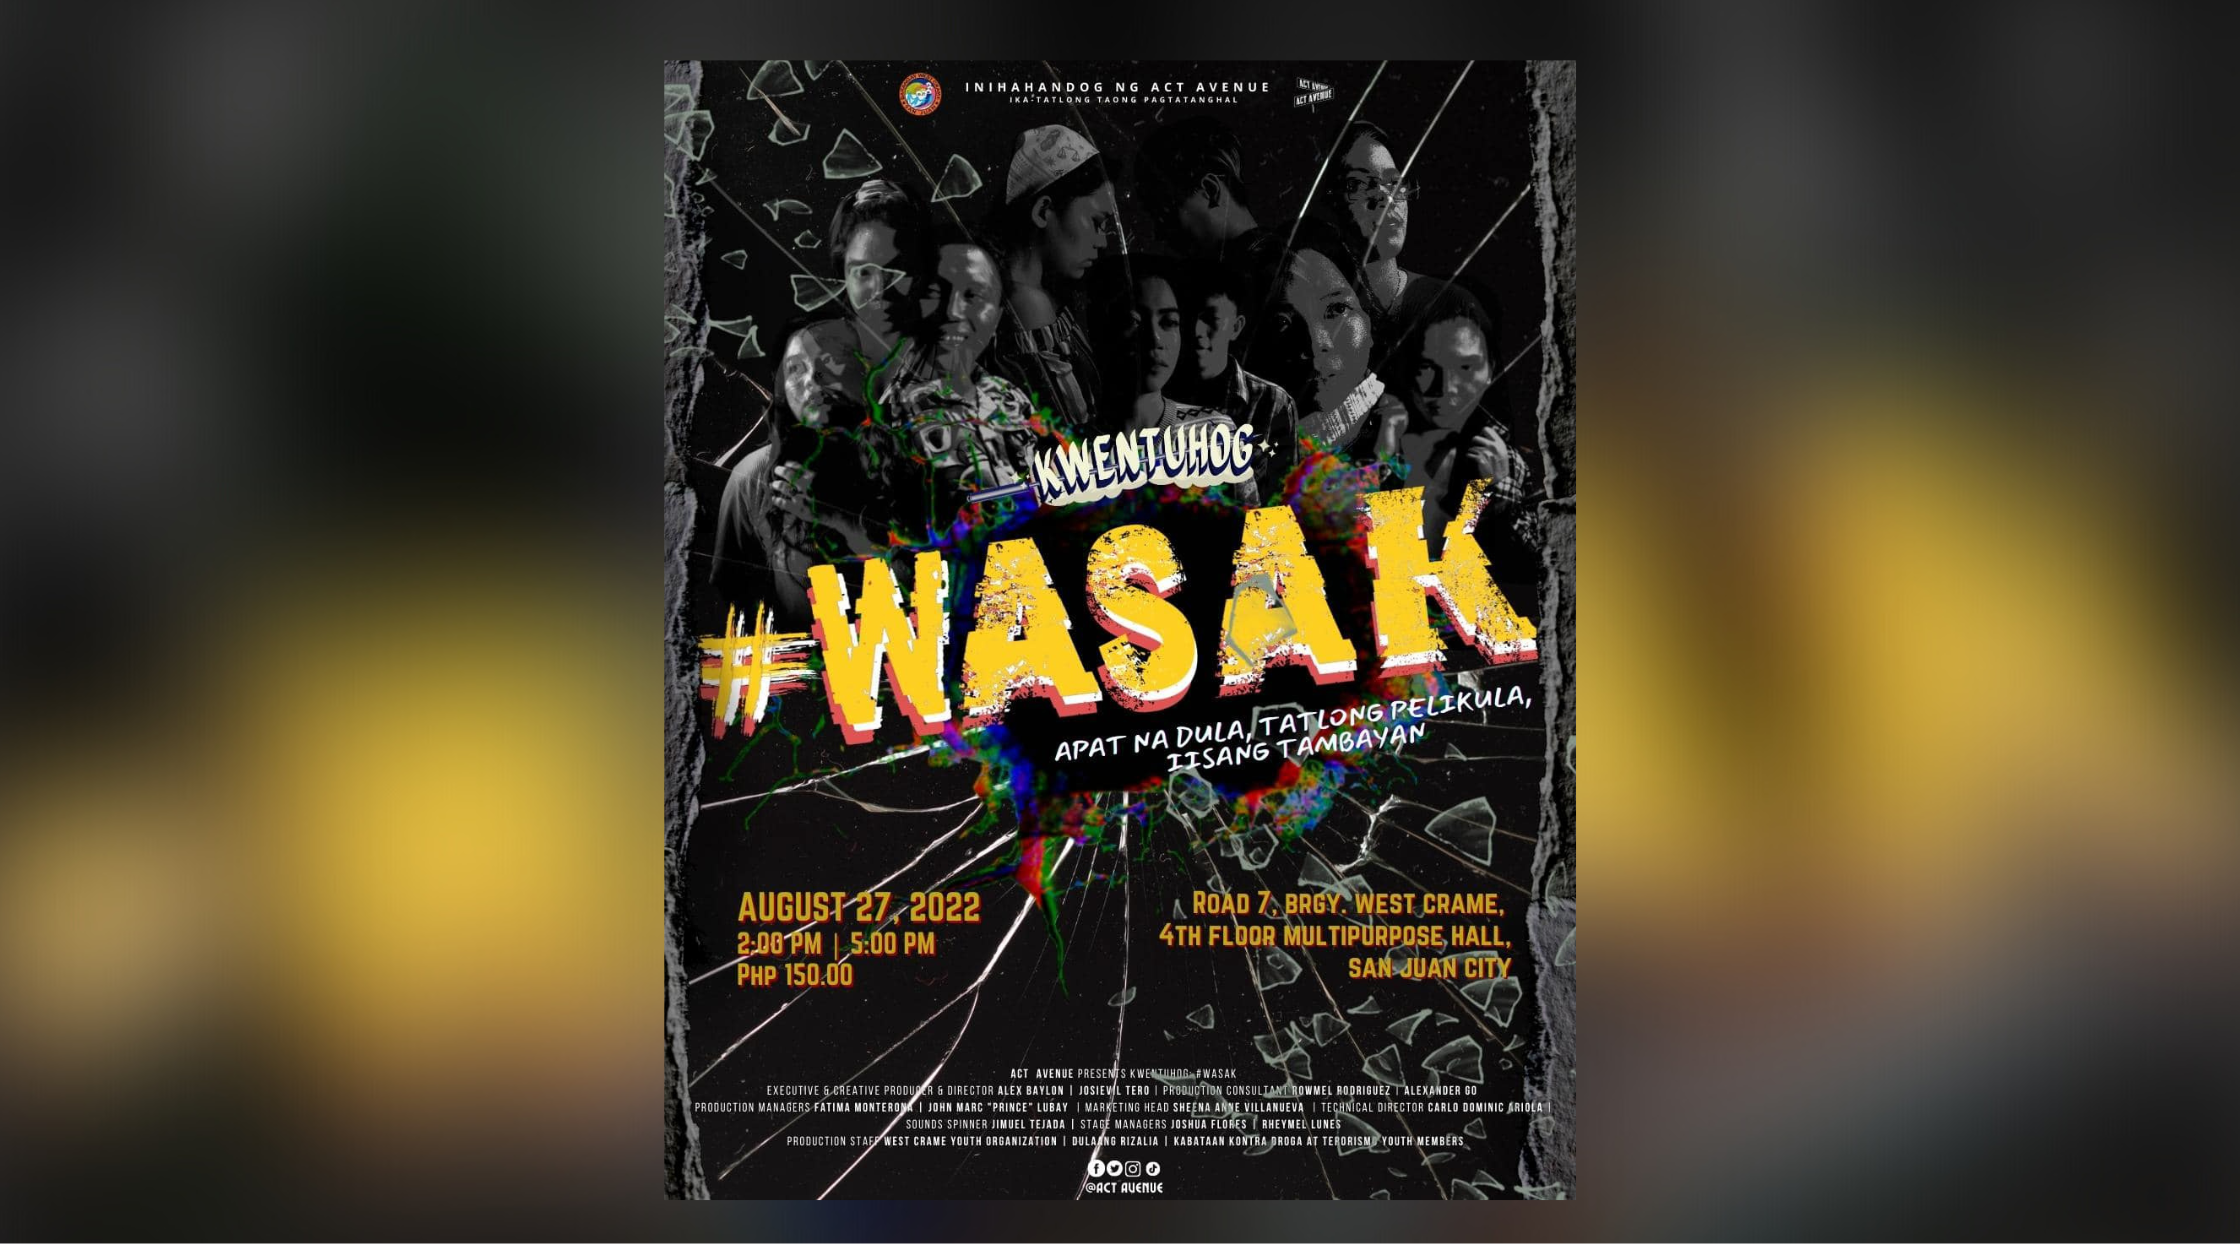 #Kwentuhog: Wasak Production of 4 Plays to be Staged